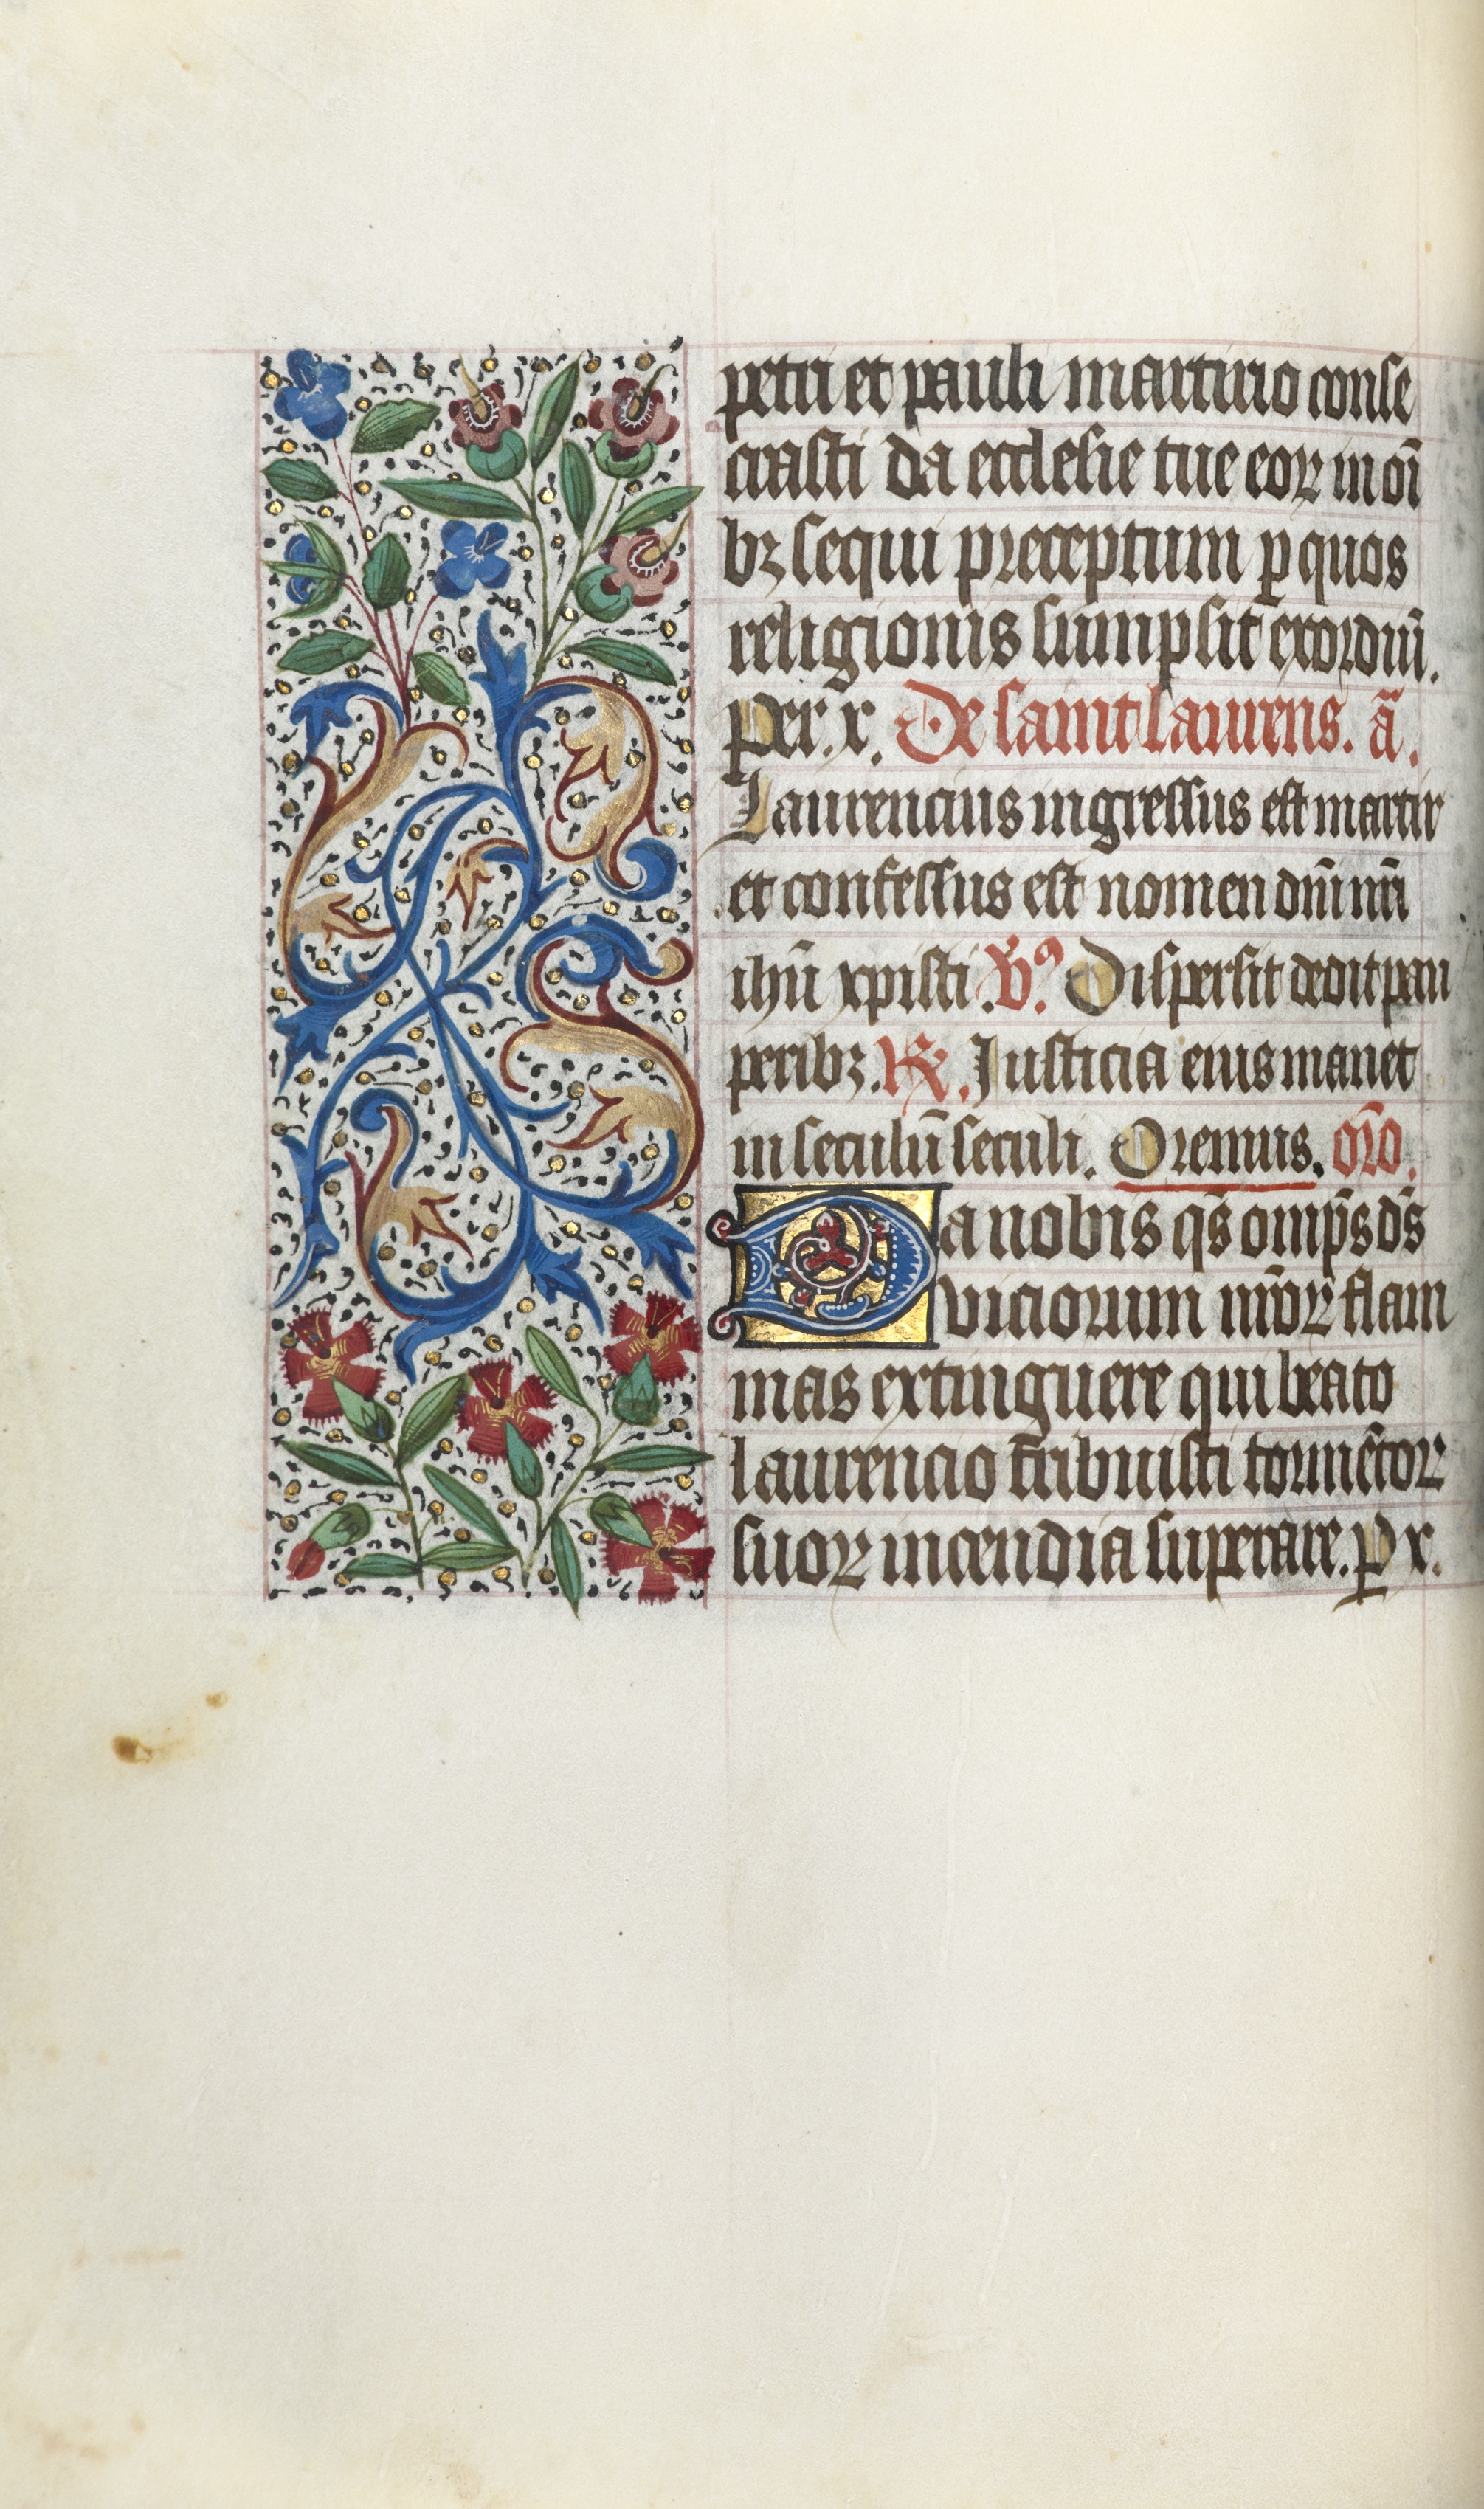 Book of Hours (Use of Rouen): fol. 51v